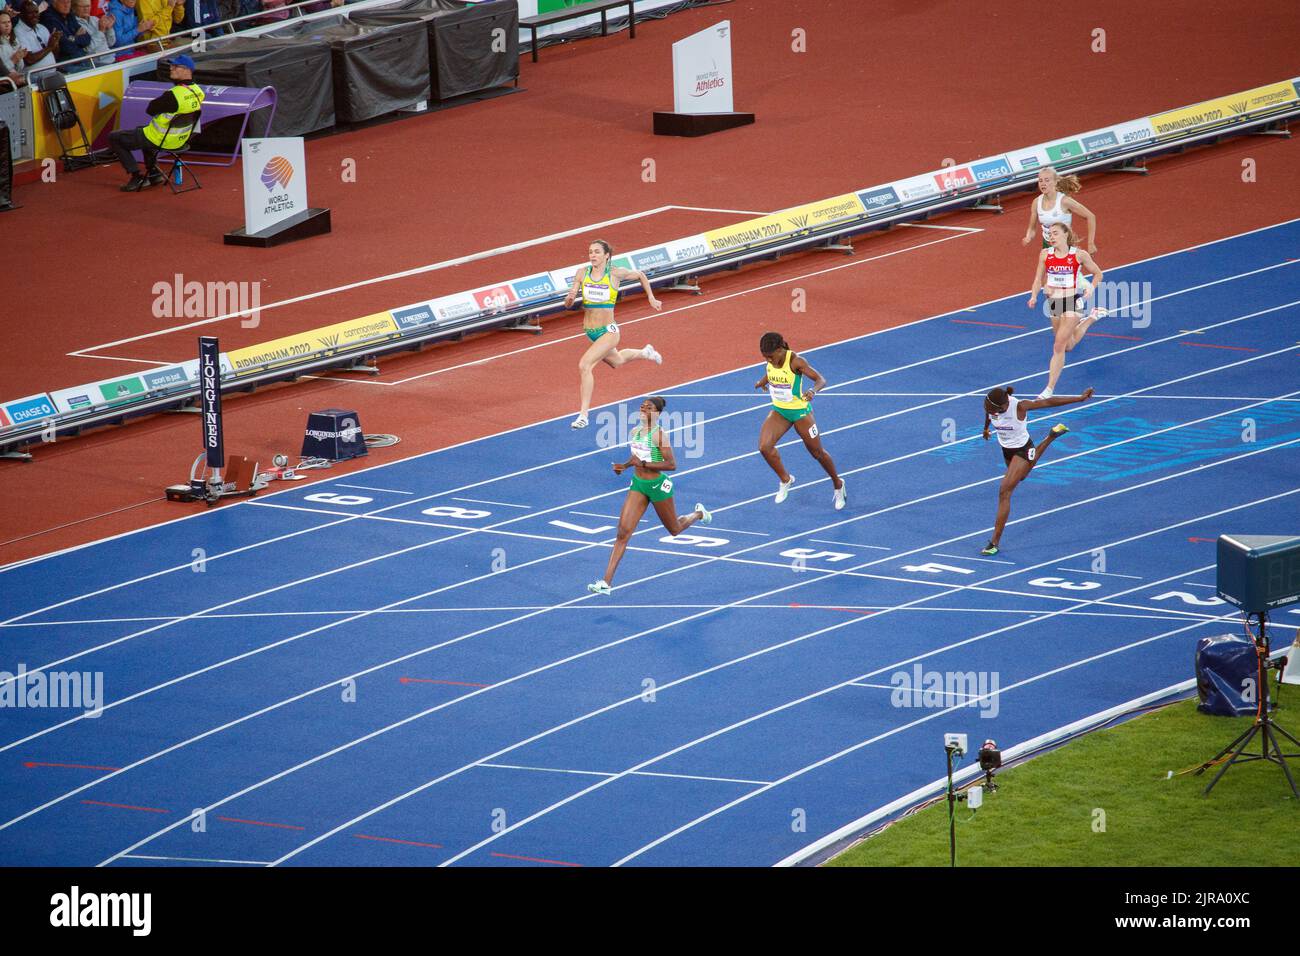 Action from the Birmingham Commonwealth Games at Alexander sports stadium on the evening of 5th August 2022. Picture shows the finish line for one of the women's 400m semi finals. Stock Photo